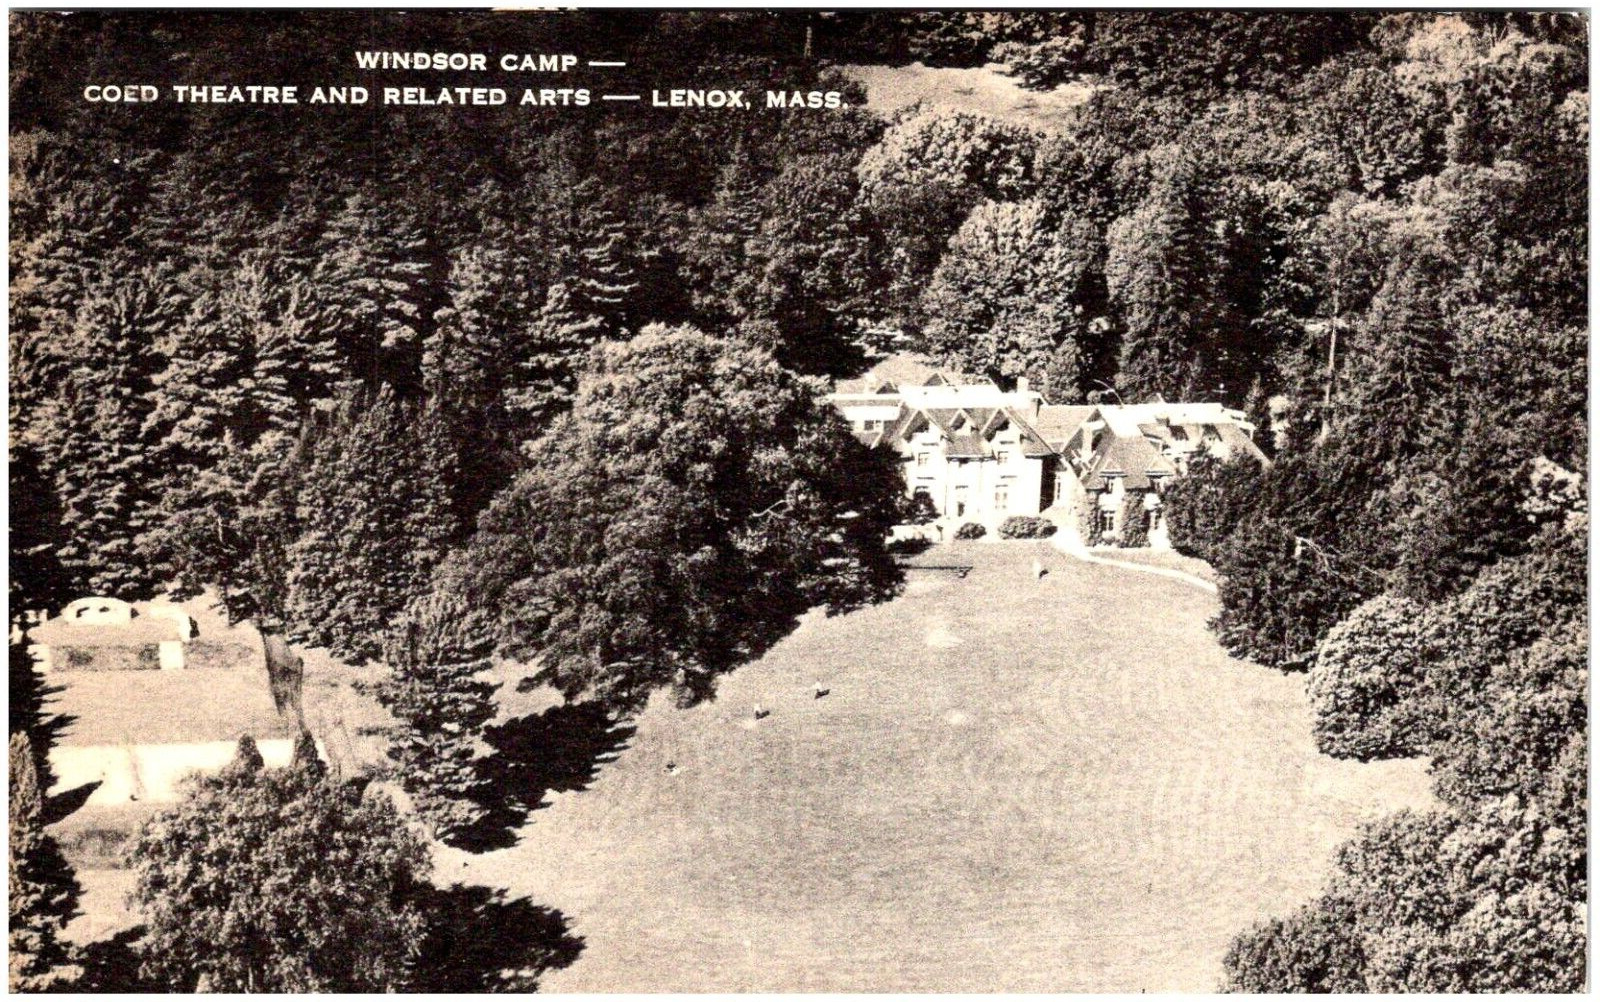 RPPC Windsor Camp Lenox MA Coed Theater 1960 Air Mail with Postage Due  Postcard